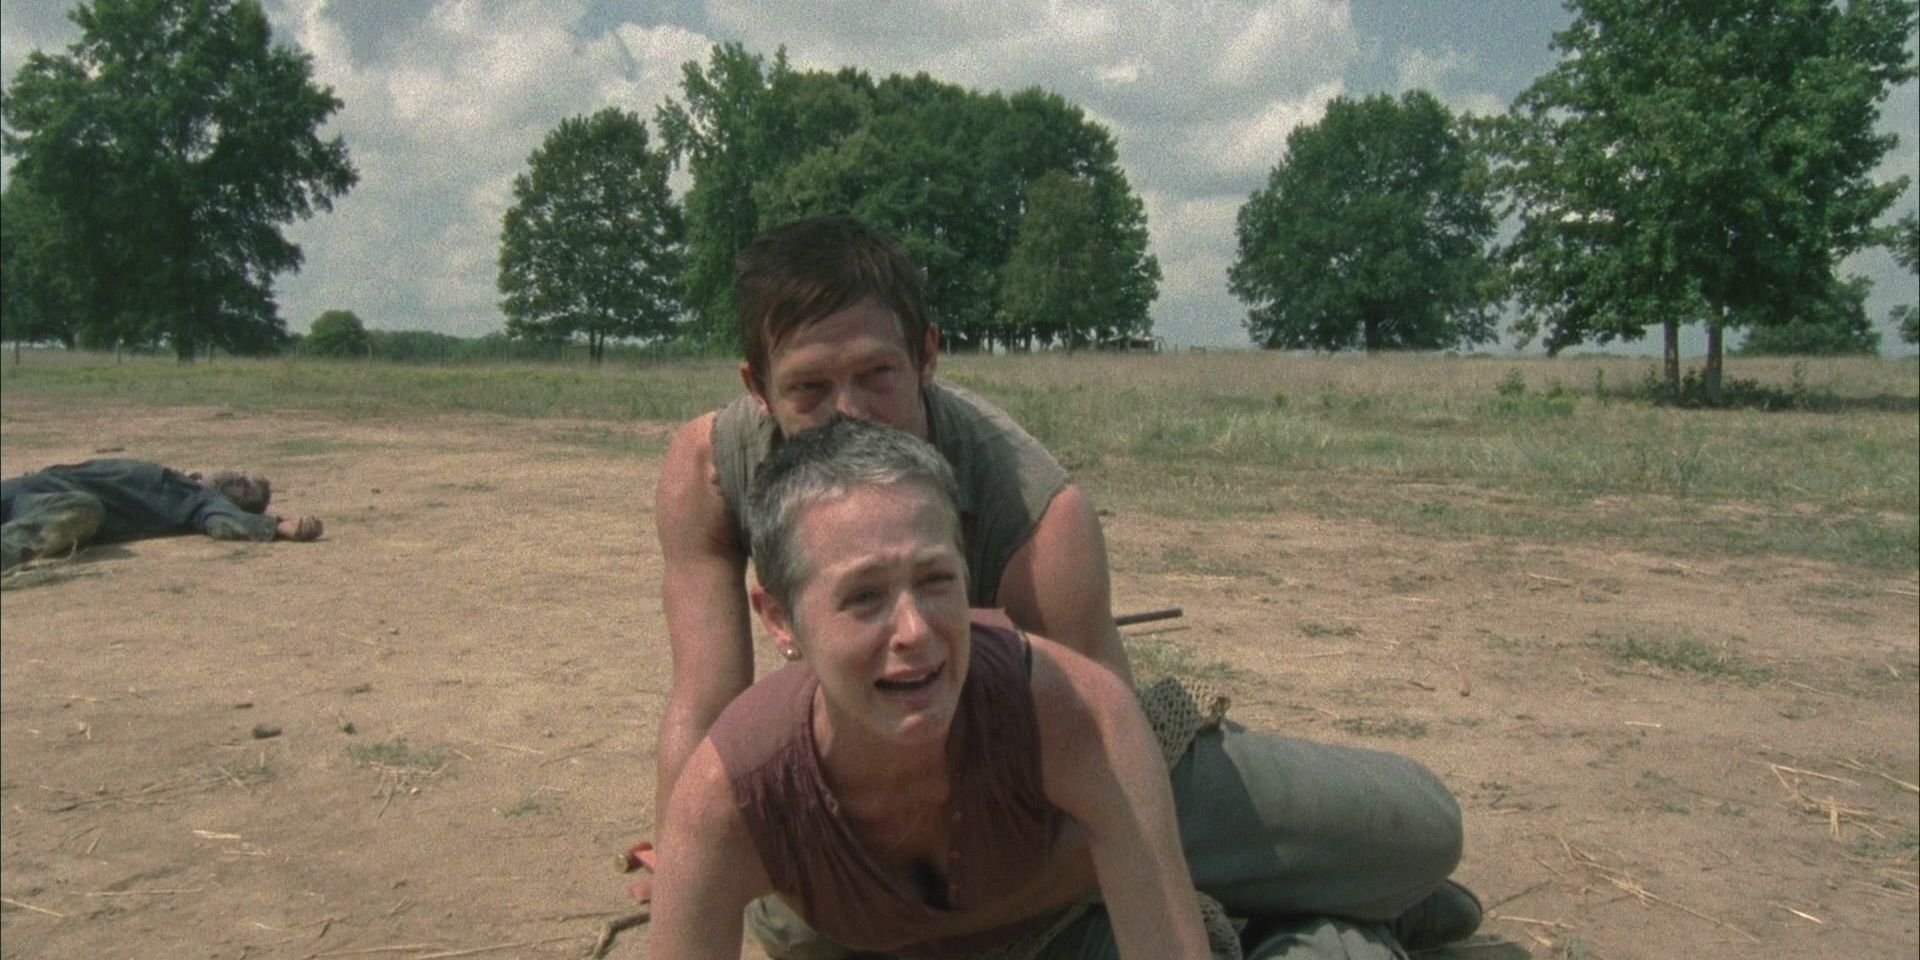 Carol grieving and Daryl restraining her.